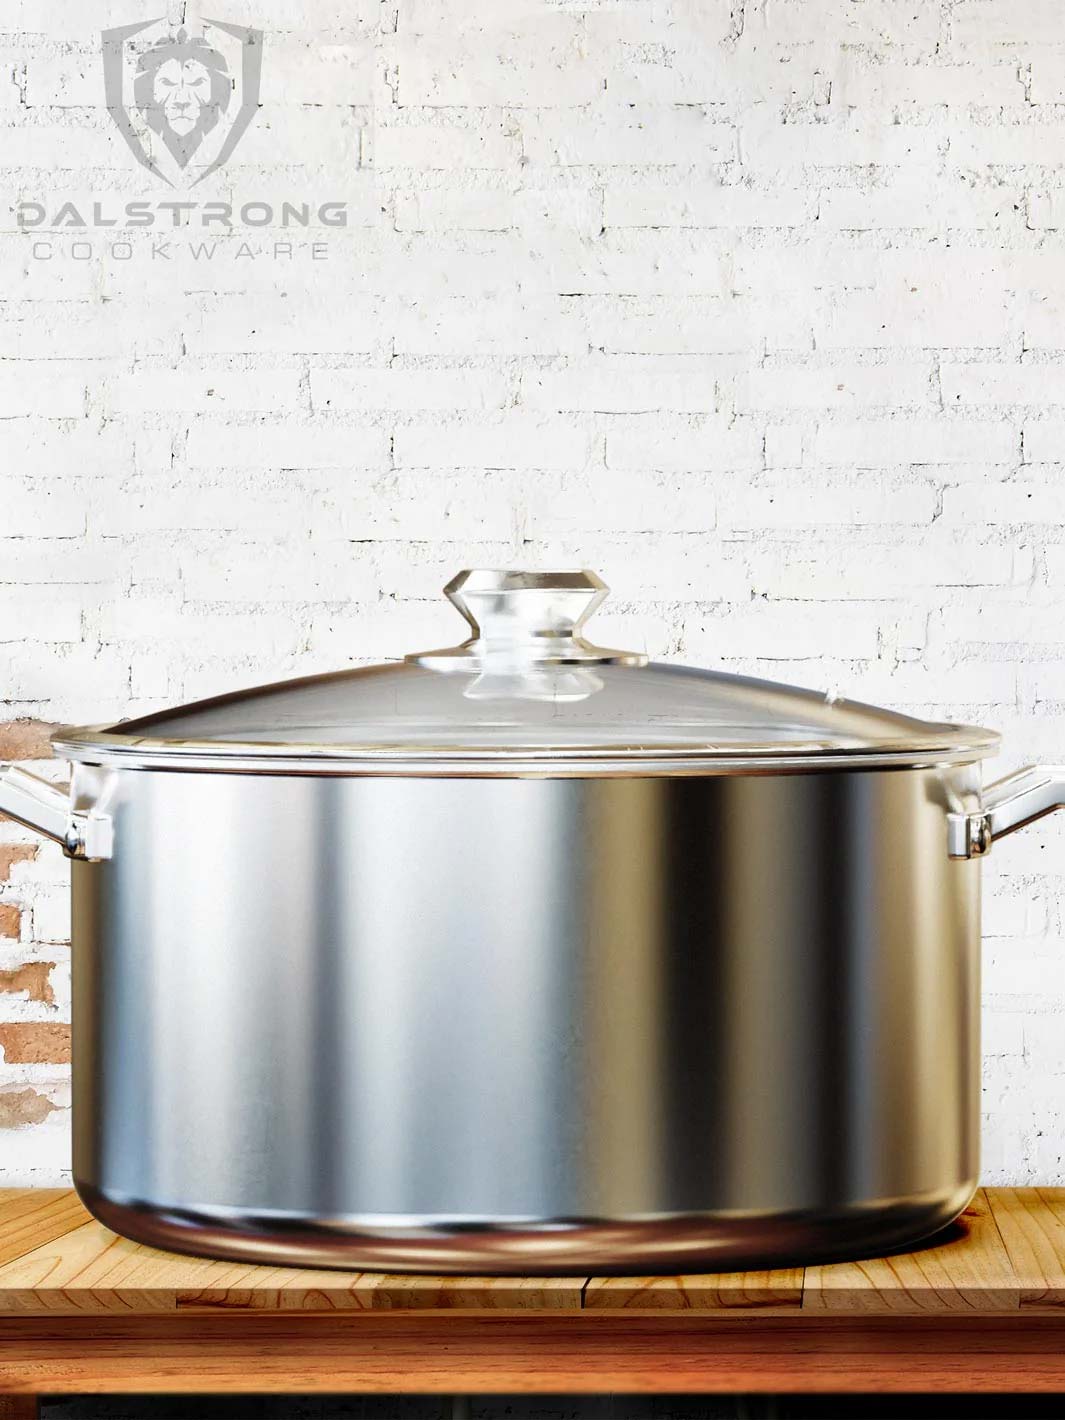 Dalstrong oberon series 12 quart stock pot silver on a wooden table.